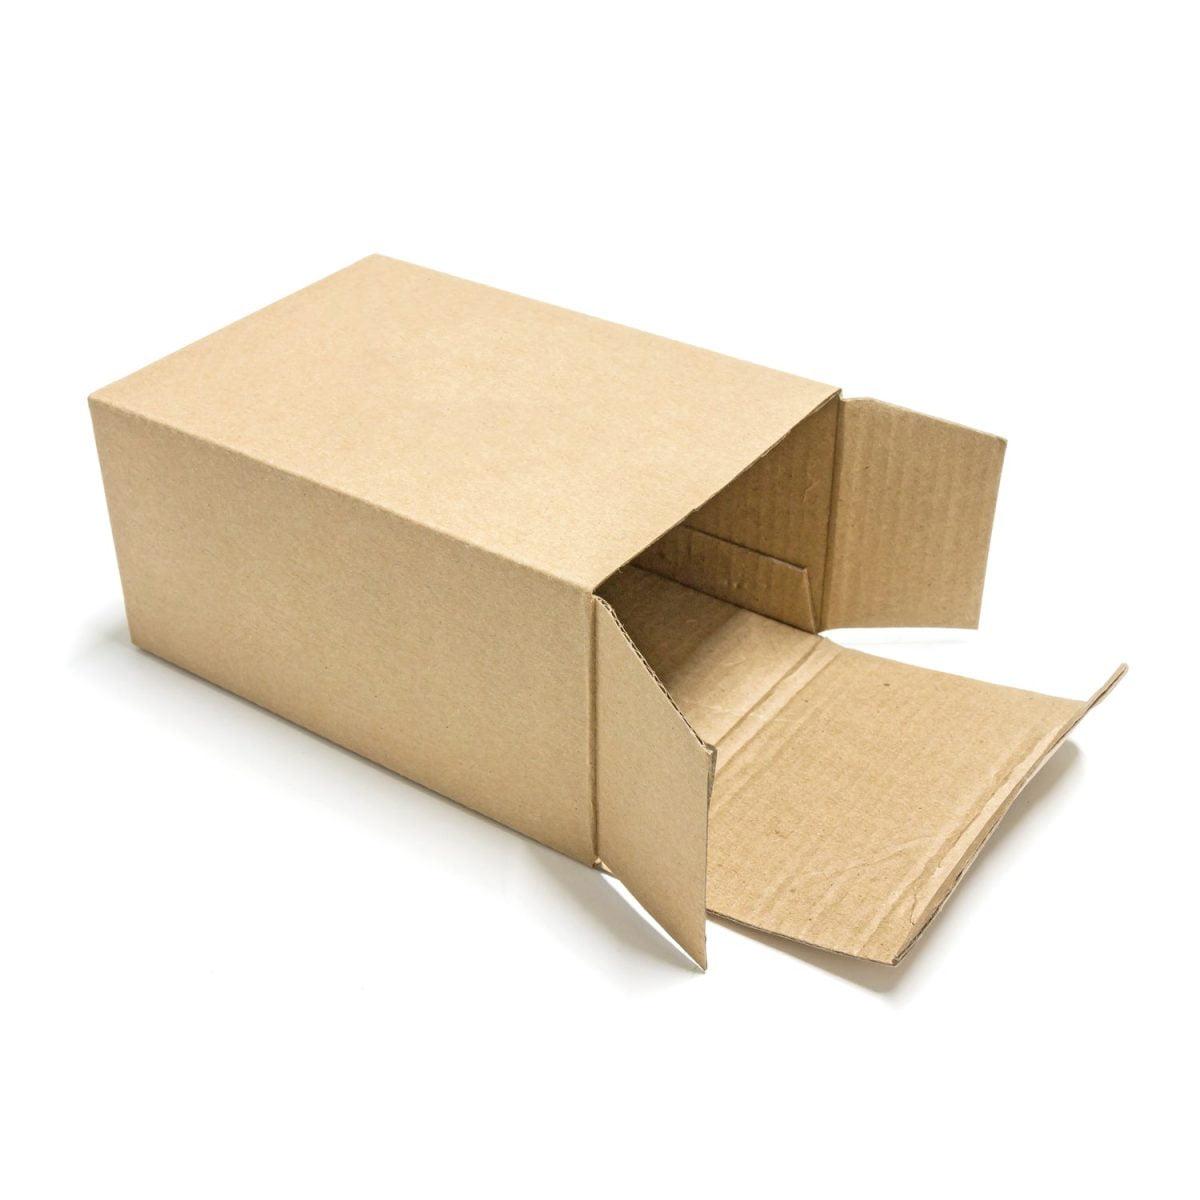 0563 BROWN BOX FOR PRODUCT PACKING 9x9x31